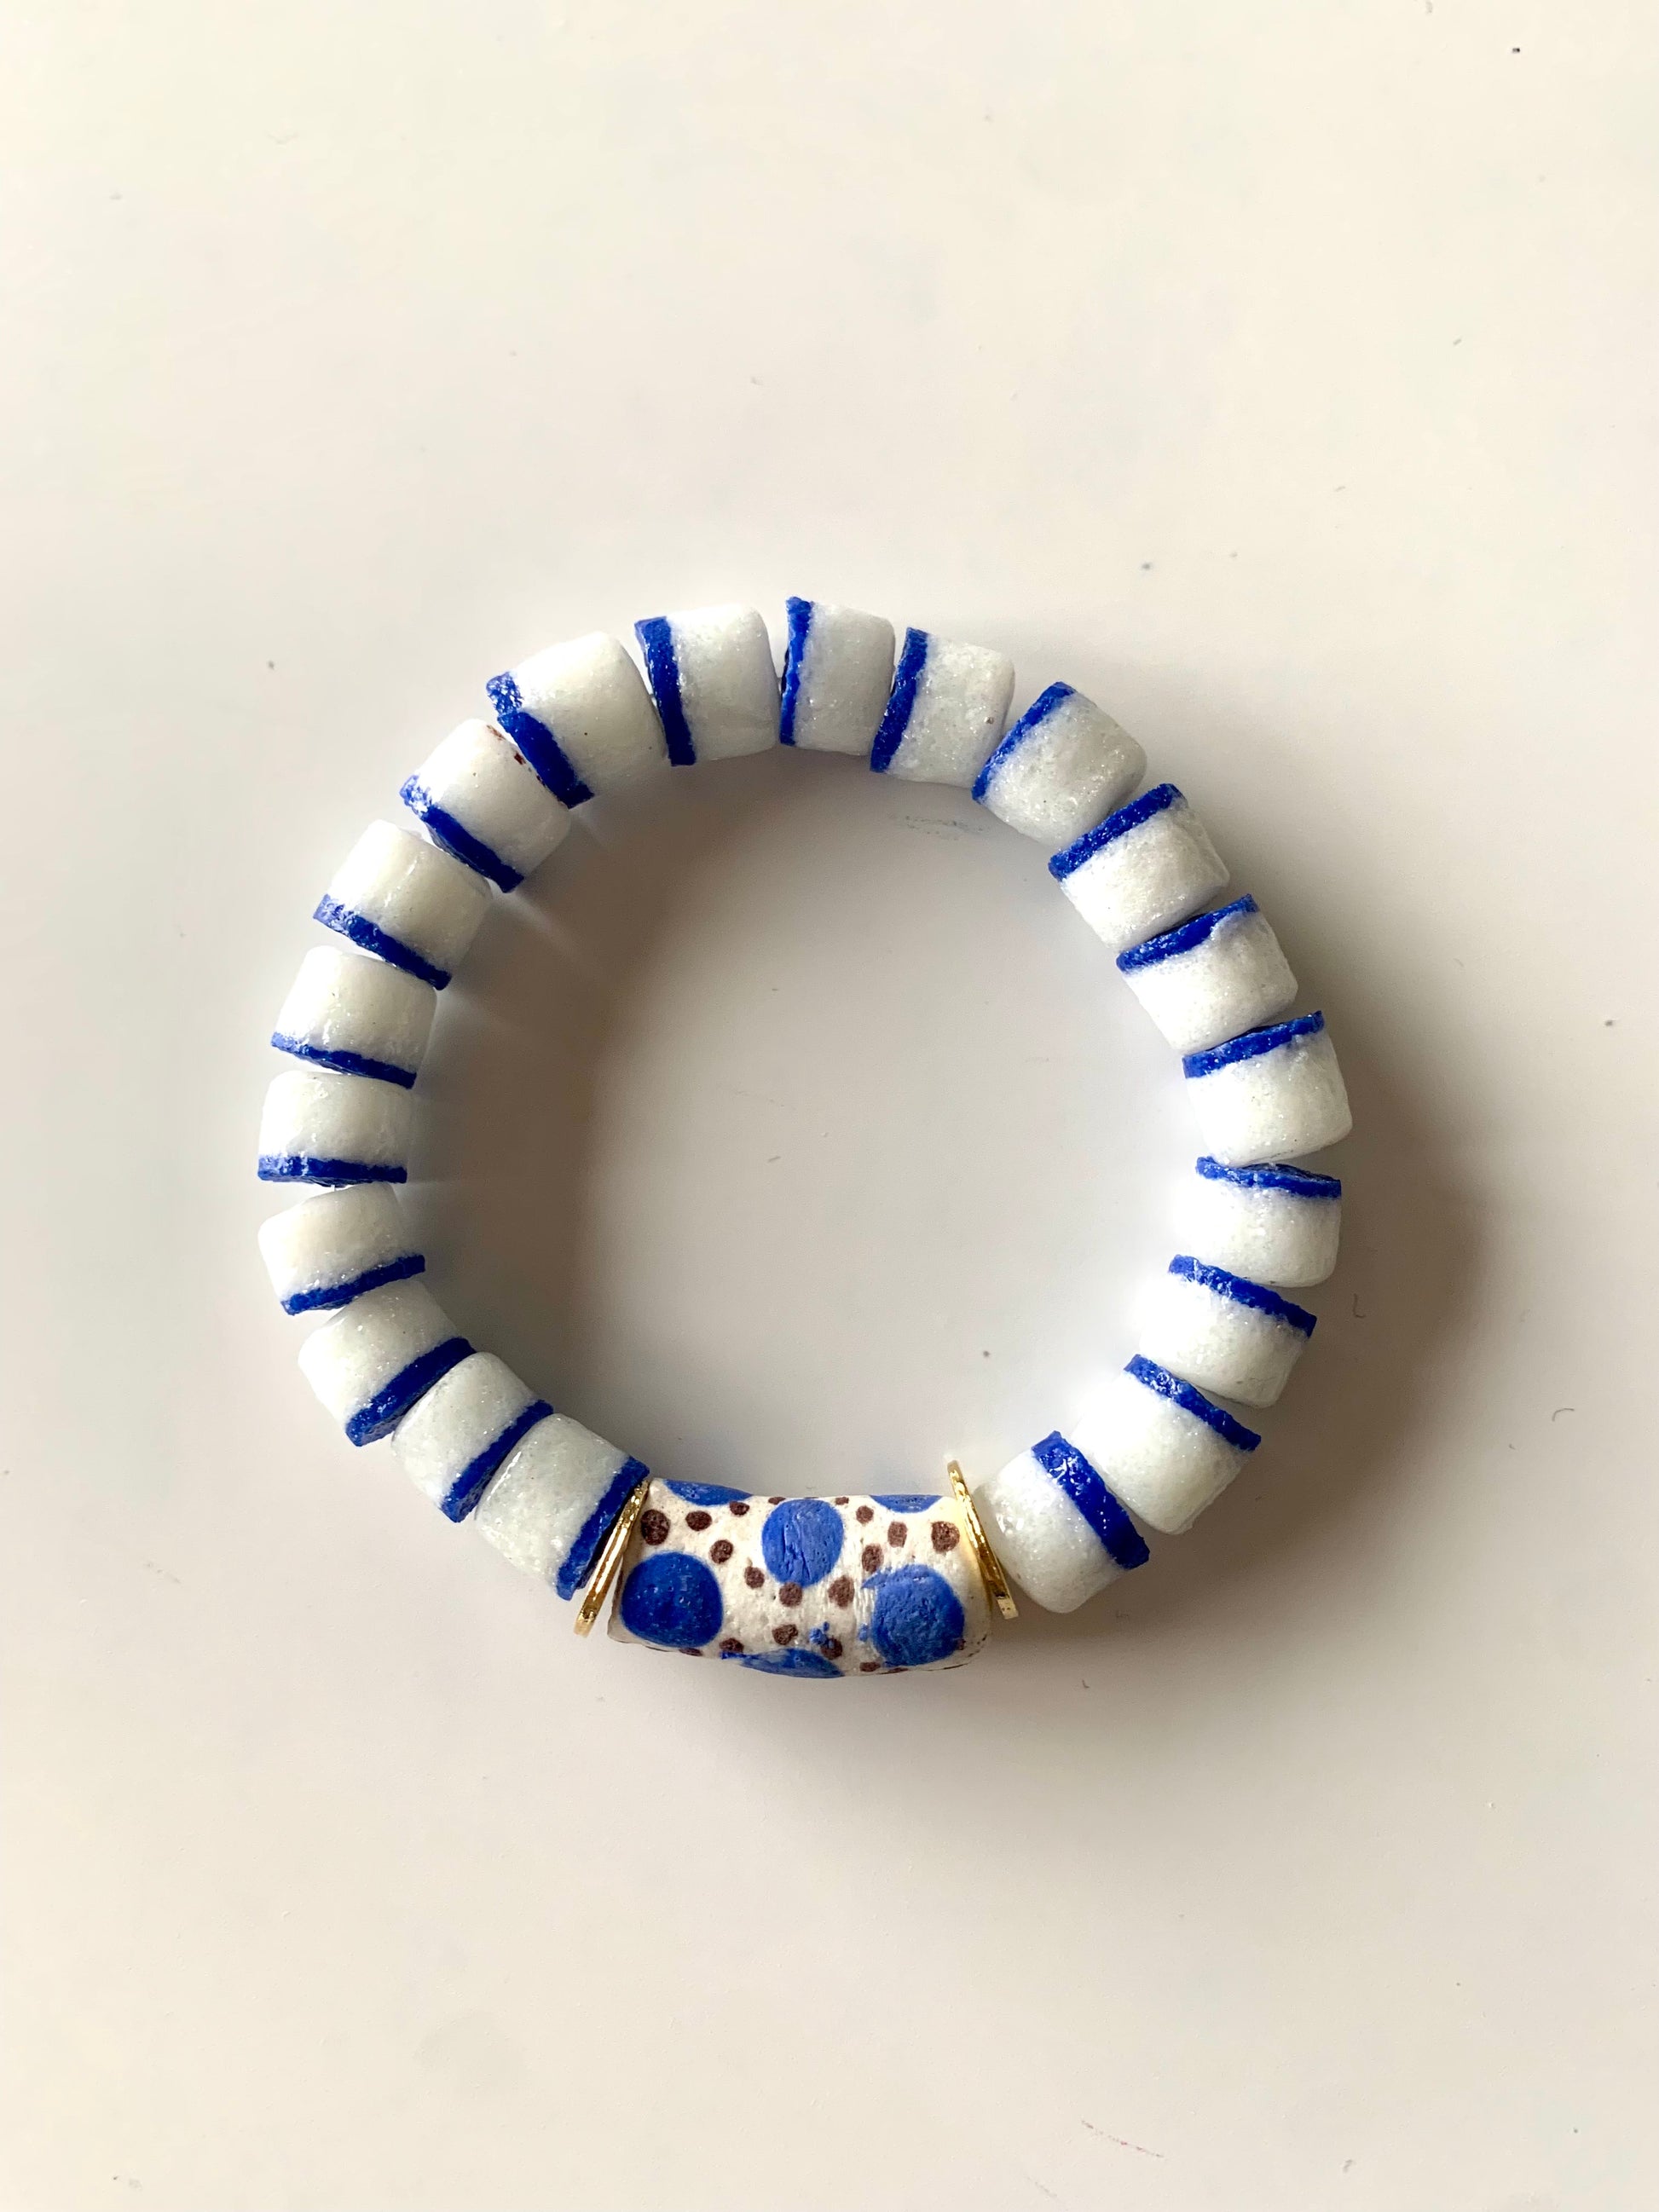 Blue and white clay bead bracelet